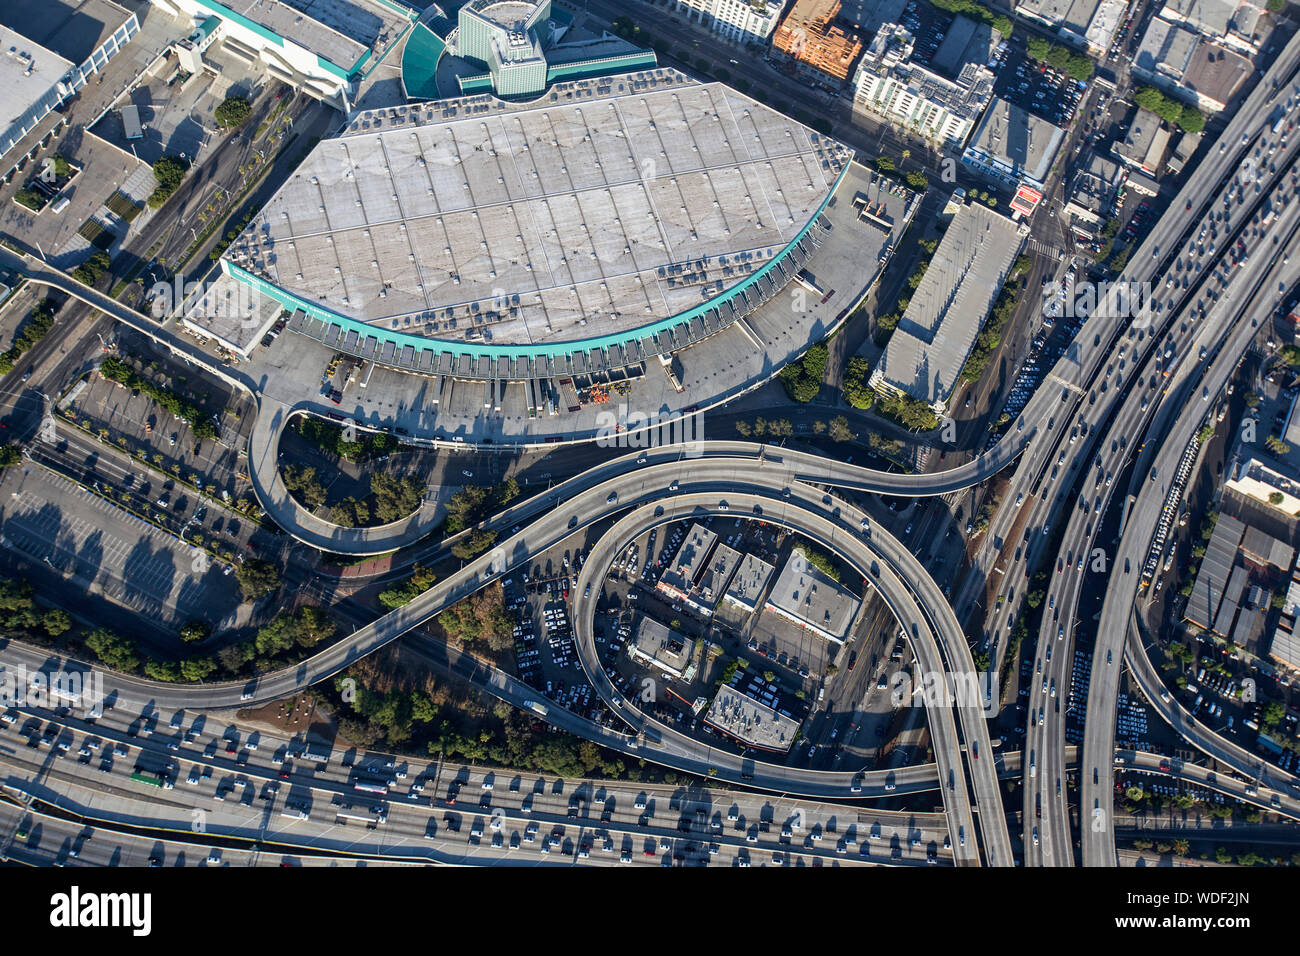 Los Angeles, California, USA - August 7, 2017:  Aerial view of LA Convention Center loading docks and busy freeways in downtown Los Angeles. Stock Photo